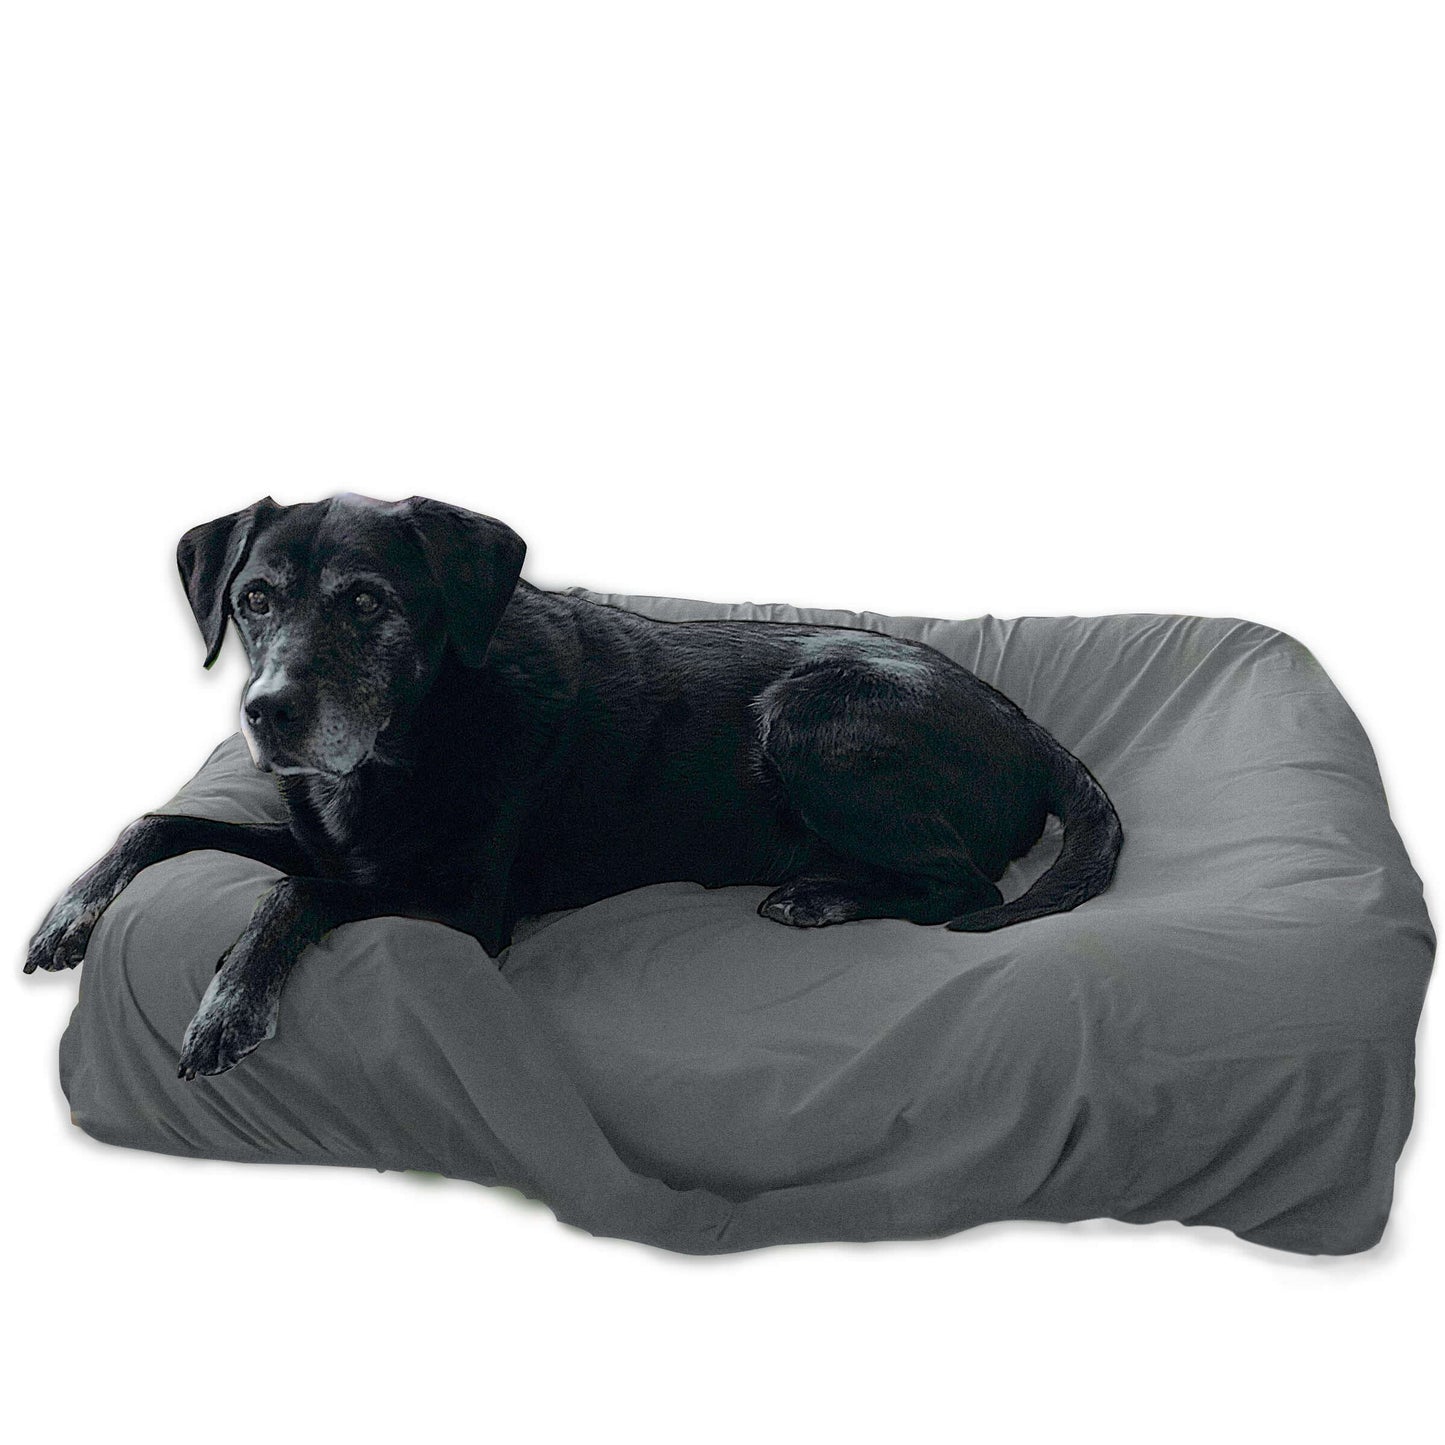 Machine washable dog bed cover grey